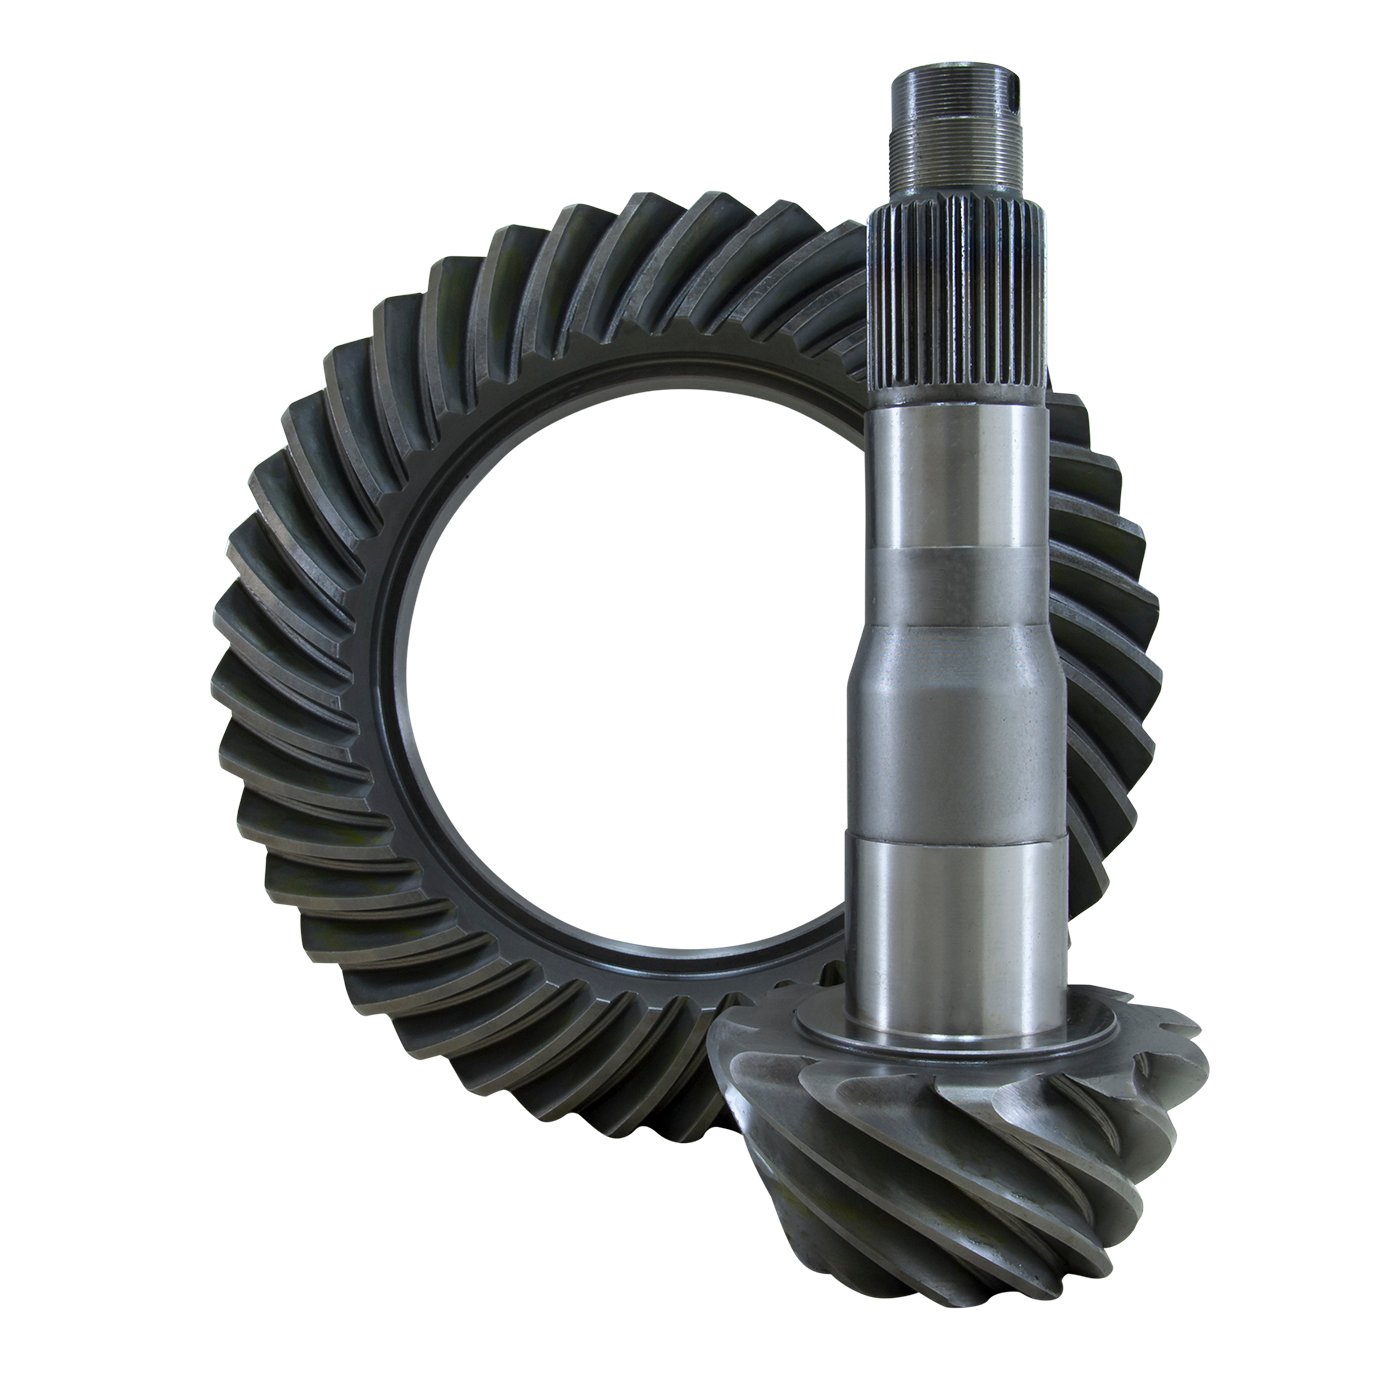 USA Standard 36364 Ring & Pinion Gear Set, For '11 & Up Ford 10.5 in., 4.11 Ratio.